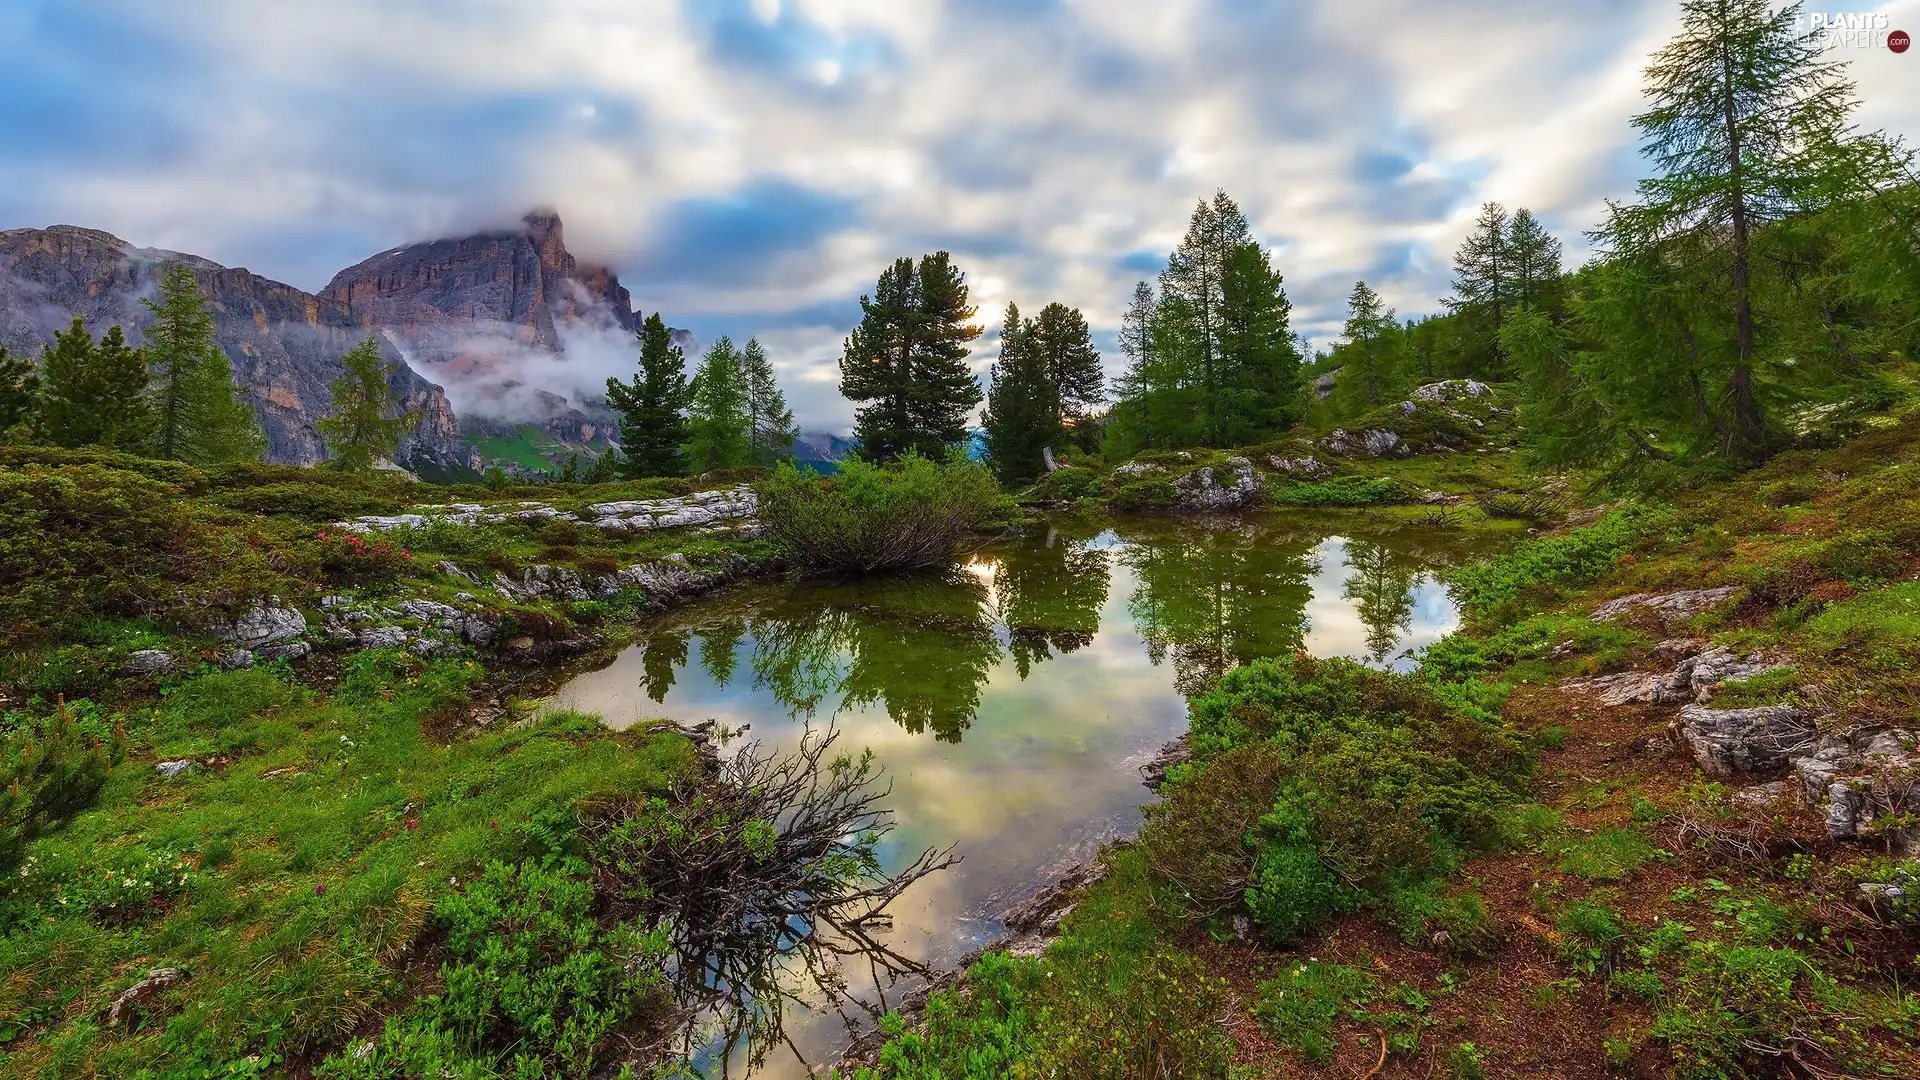 Dolomites, rocks, Italy, trees, Plants, Mountains, puddle, viewes